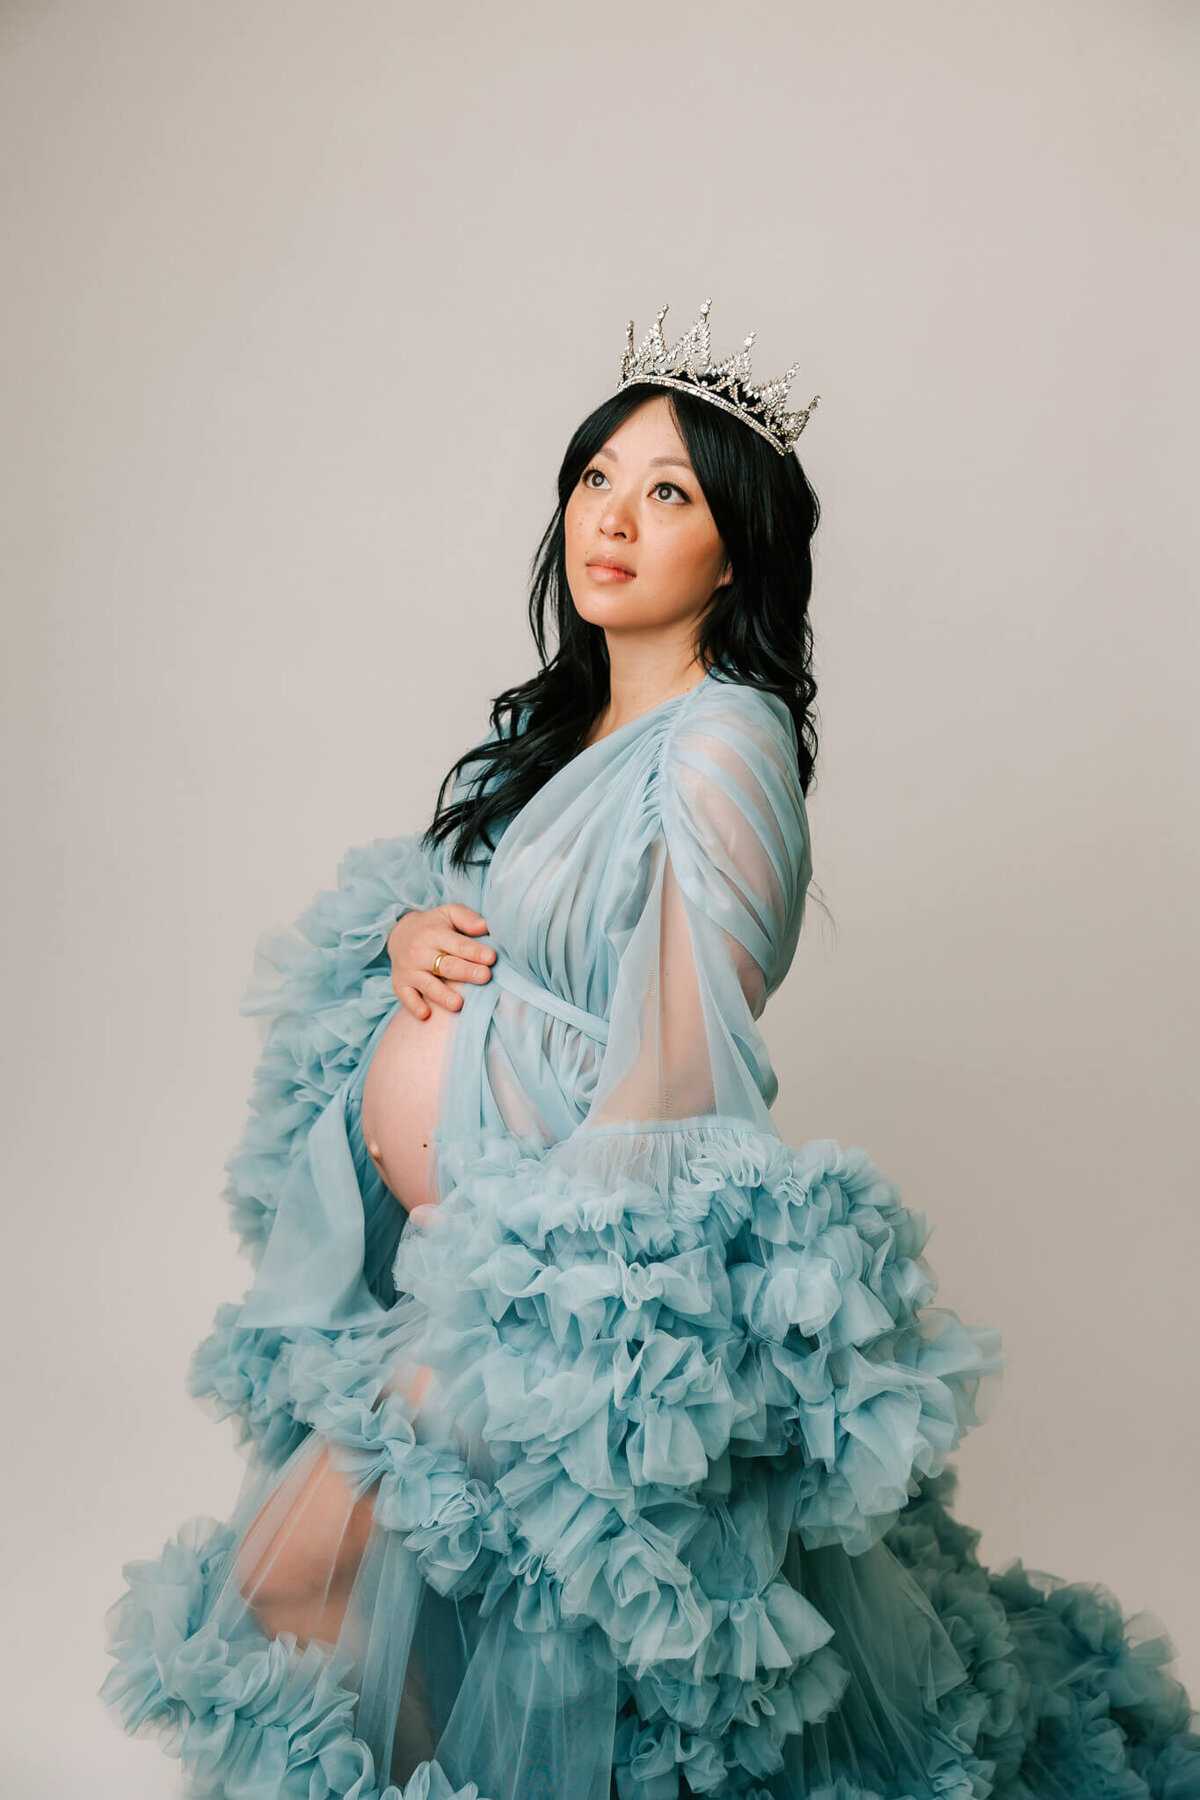 three quarter portrait of a mom wearing a blue tulle dress and crown. She is looking off to the side and the background is white